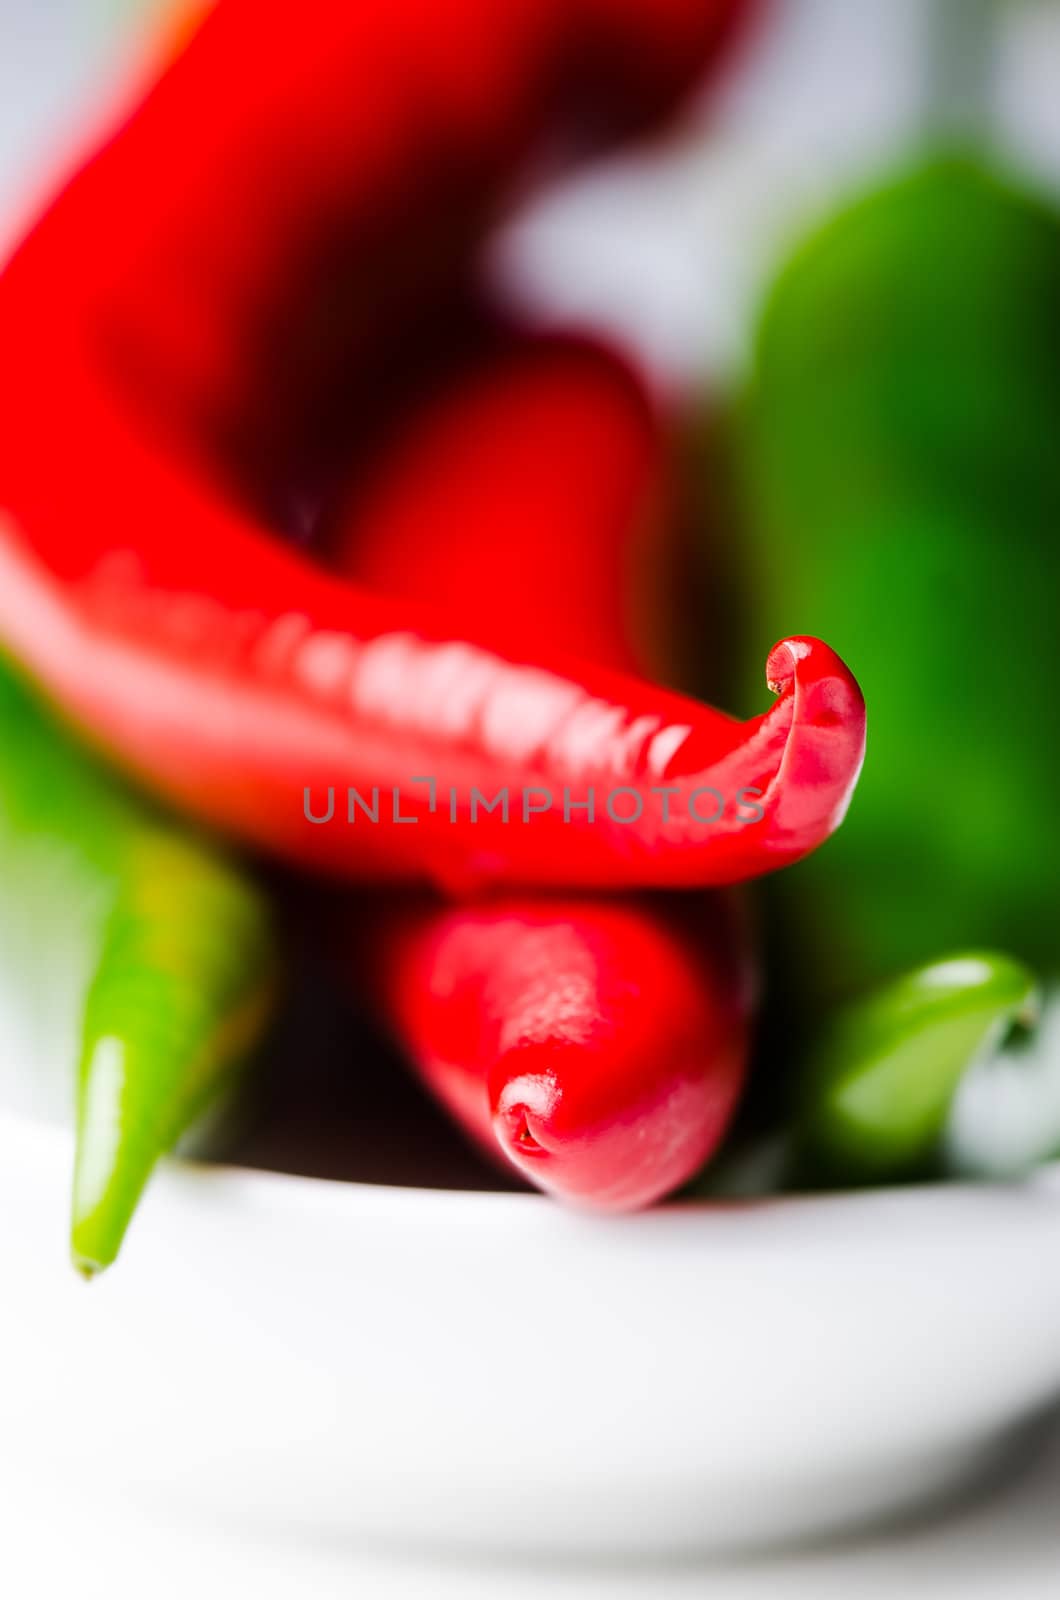 Green and red chili peppers in white bowl close up